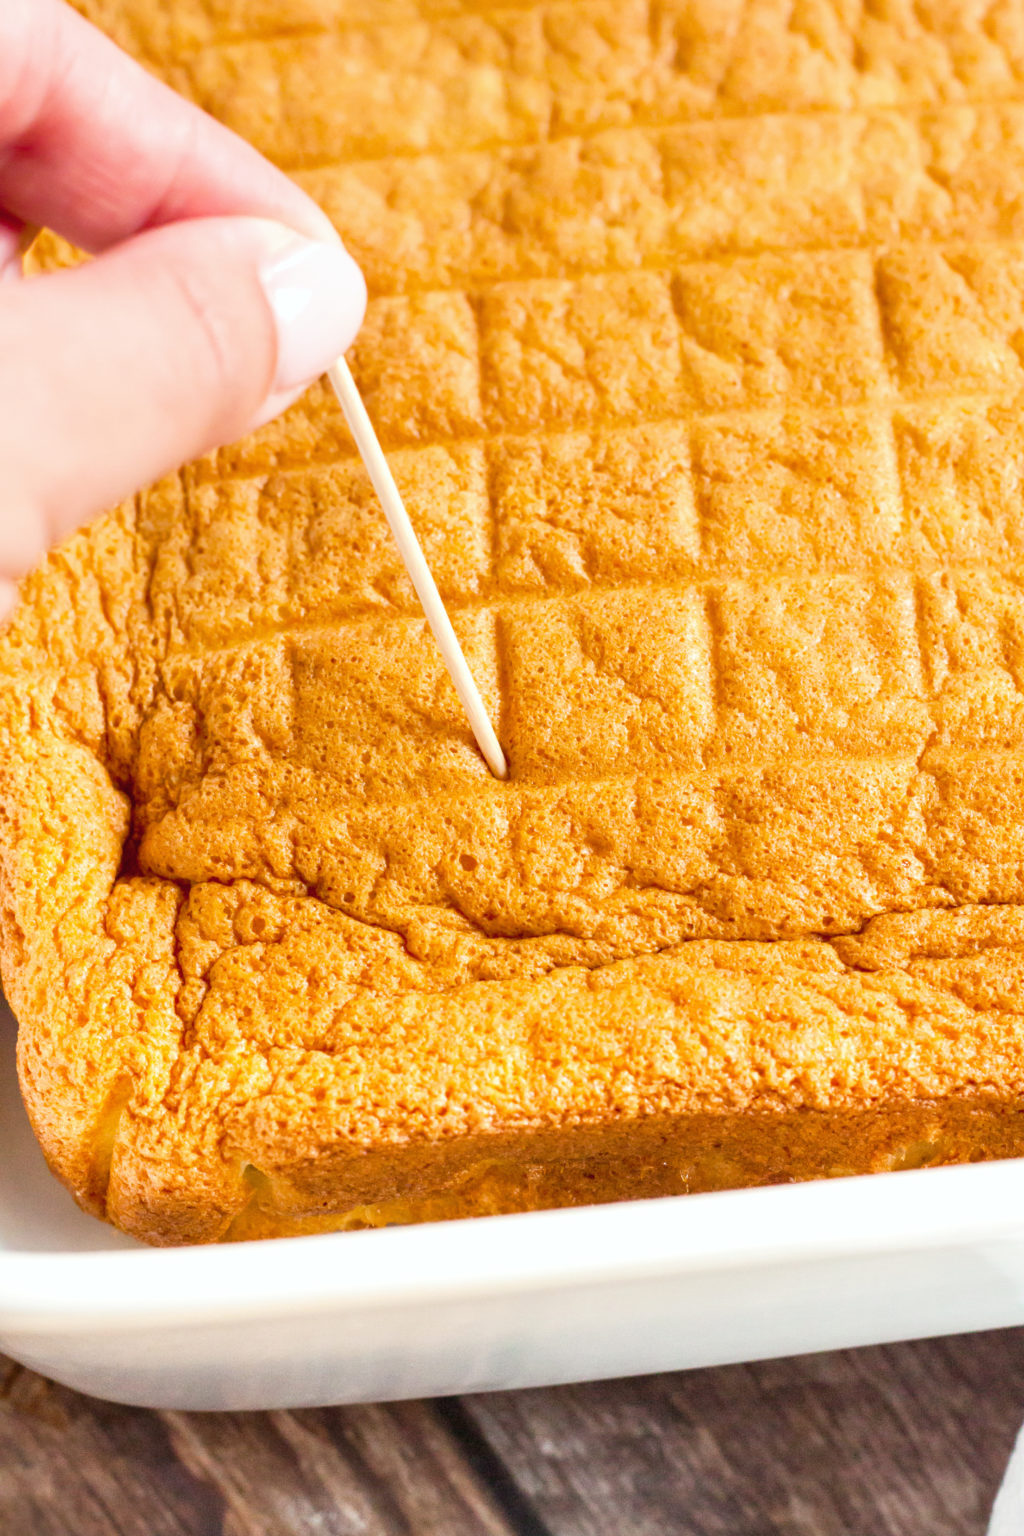 Cake is poked with a toothpick to allow liquid to soak into the sponge.